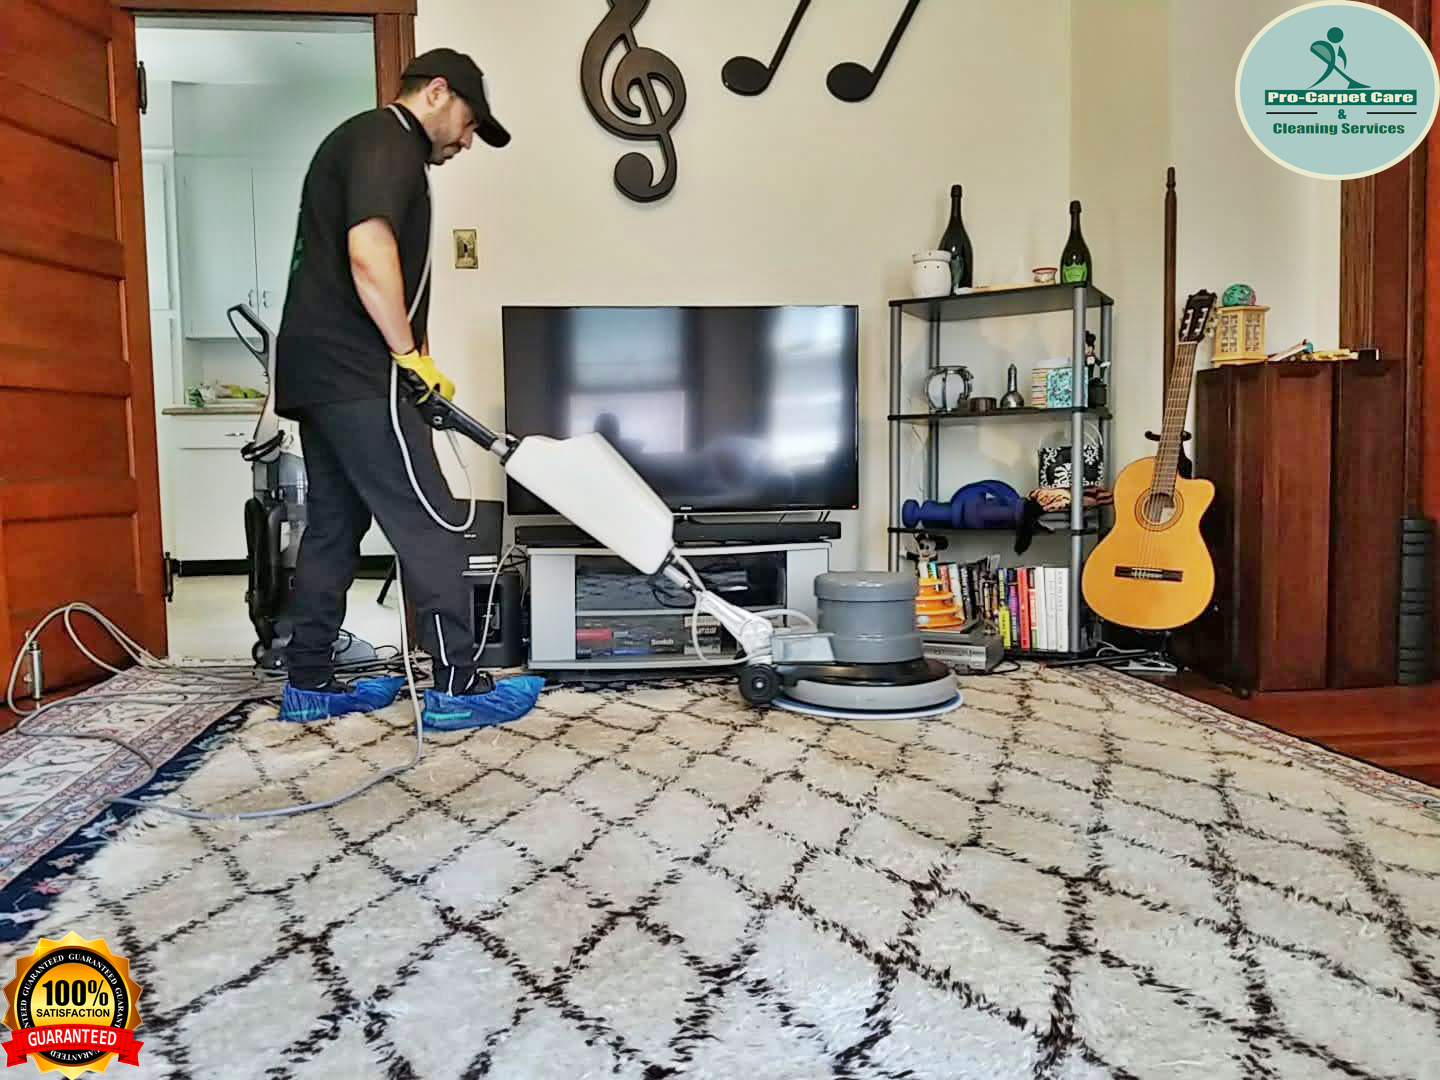 Rug Cleaning with Pro Carpet Care Summit NJ😎 Carpet Cleaning Services in New Jersey Pro